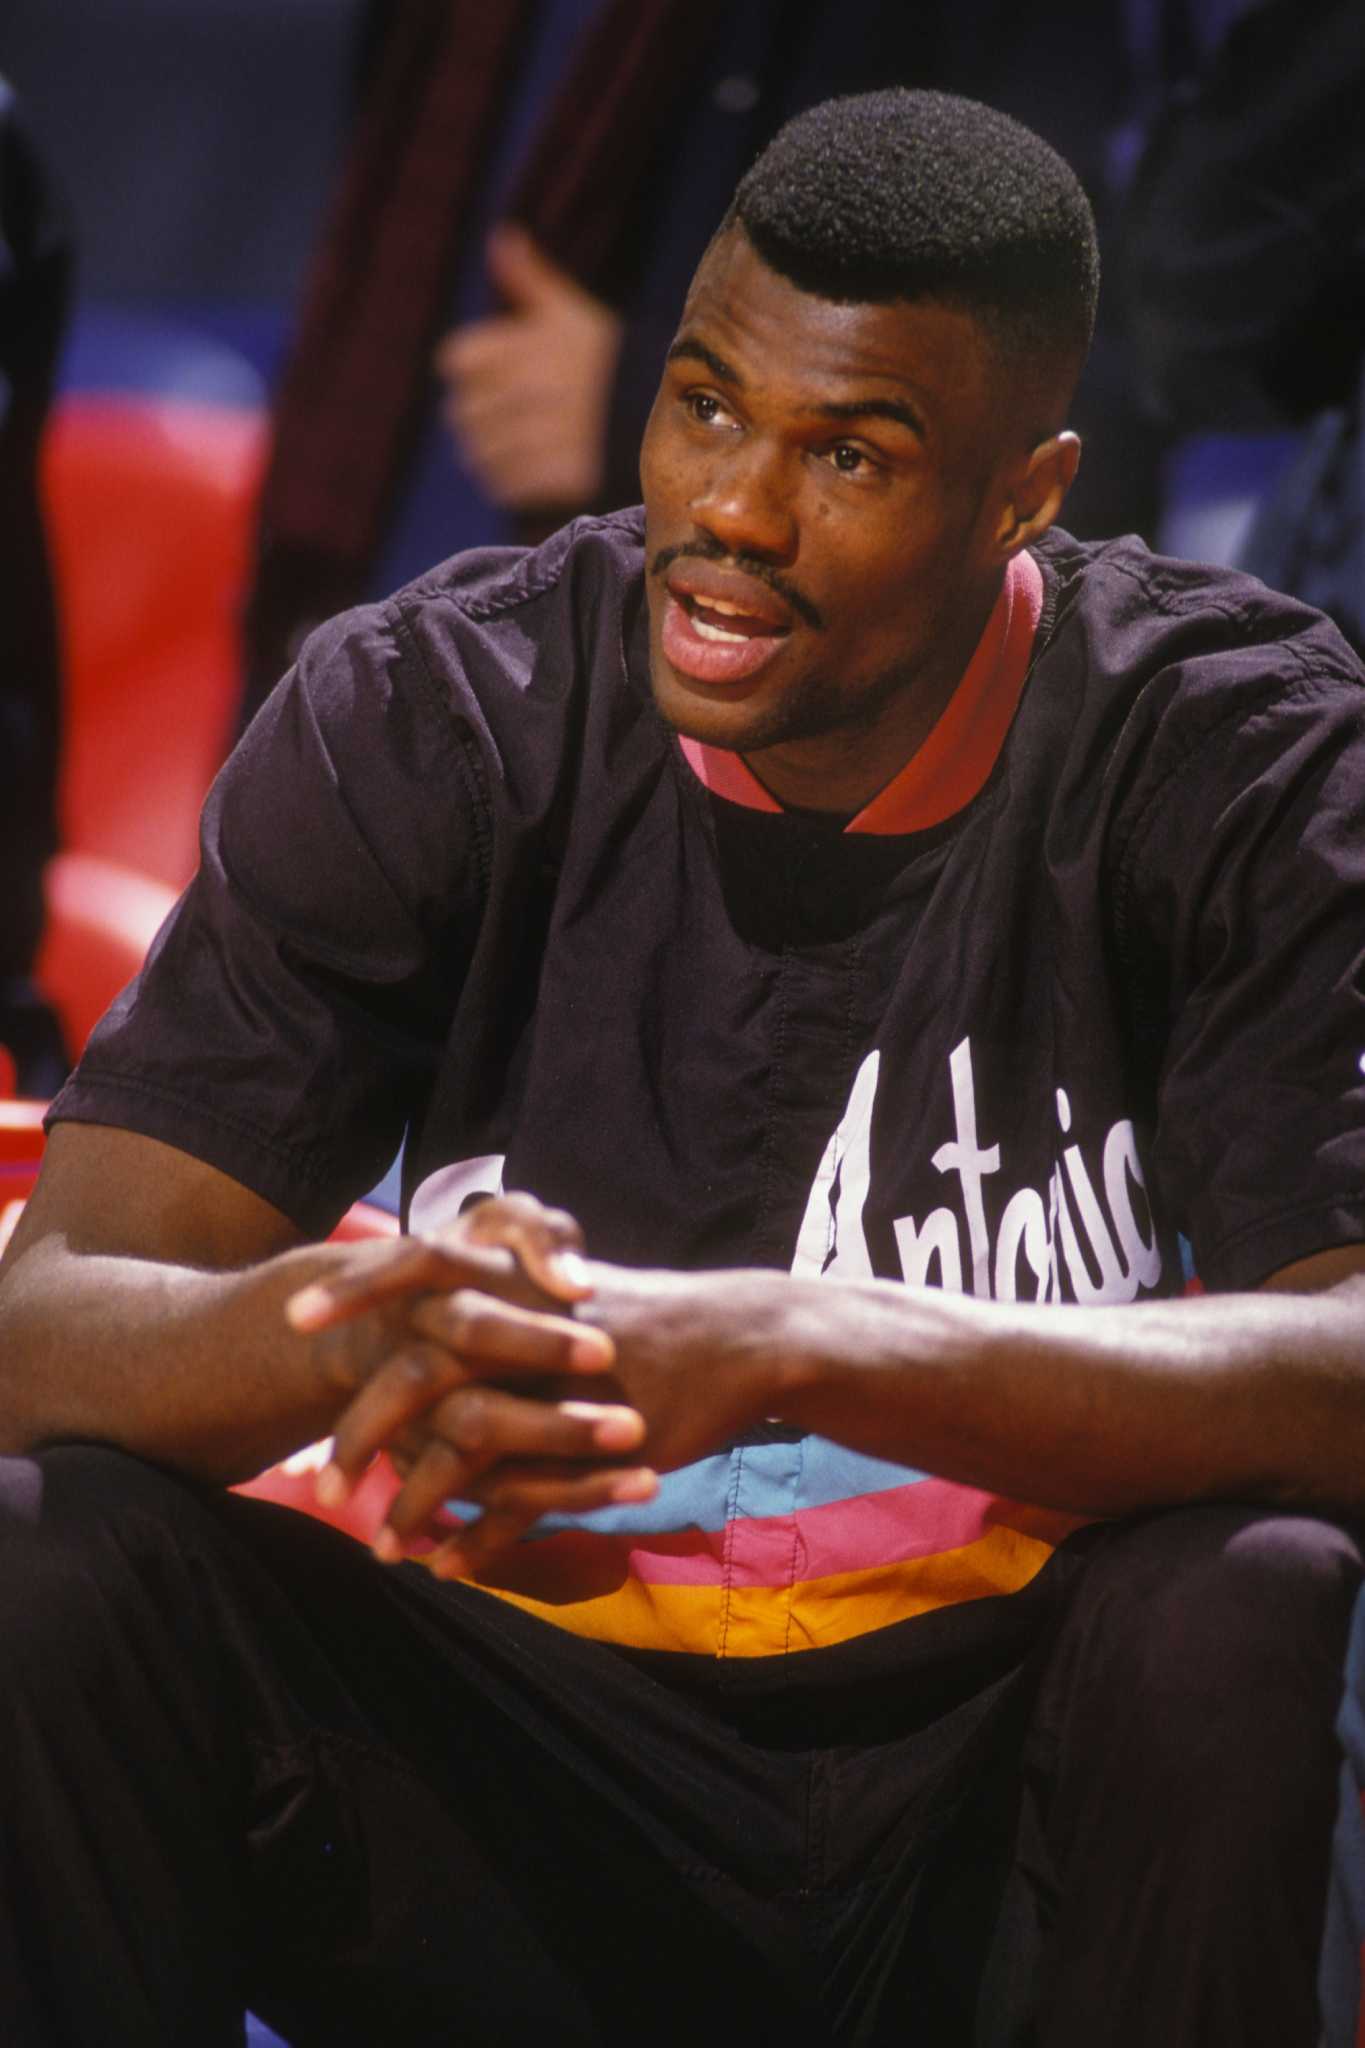 Who's more athletic: David Robinson or Dwight Howard? - Page 4